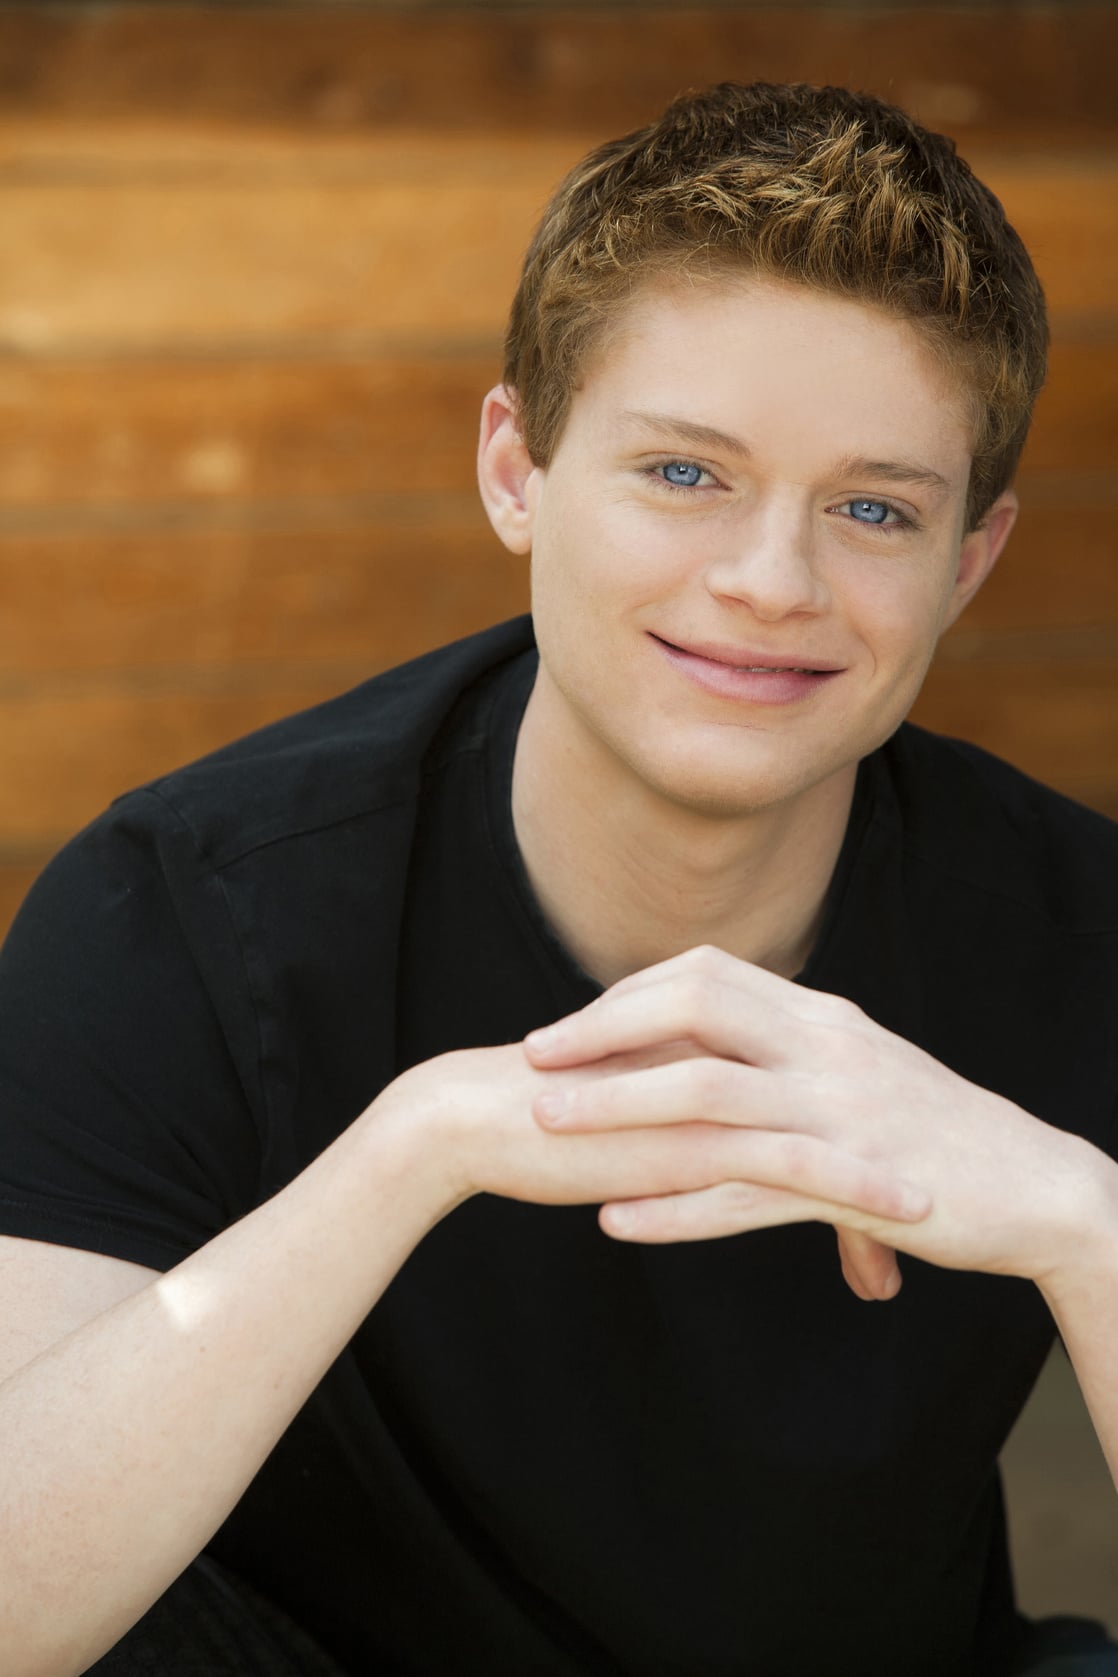 Picture of Sean Berdy